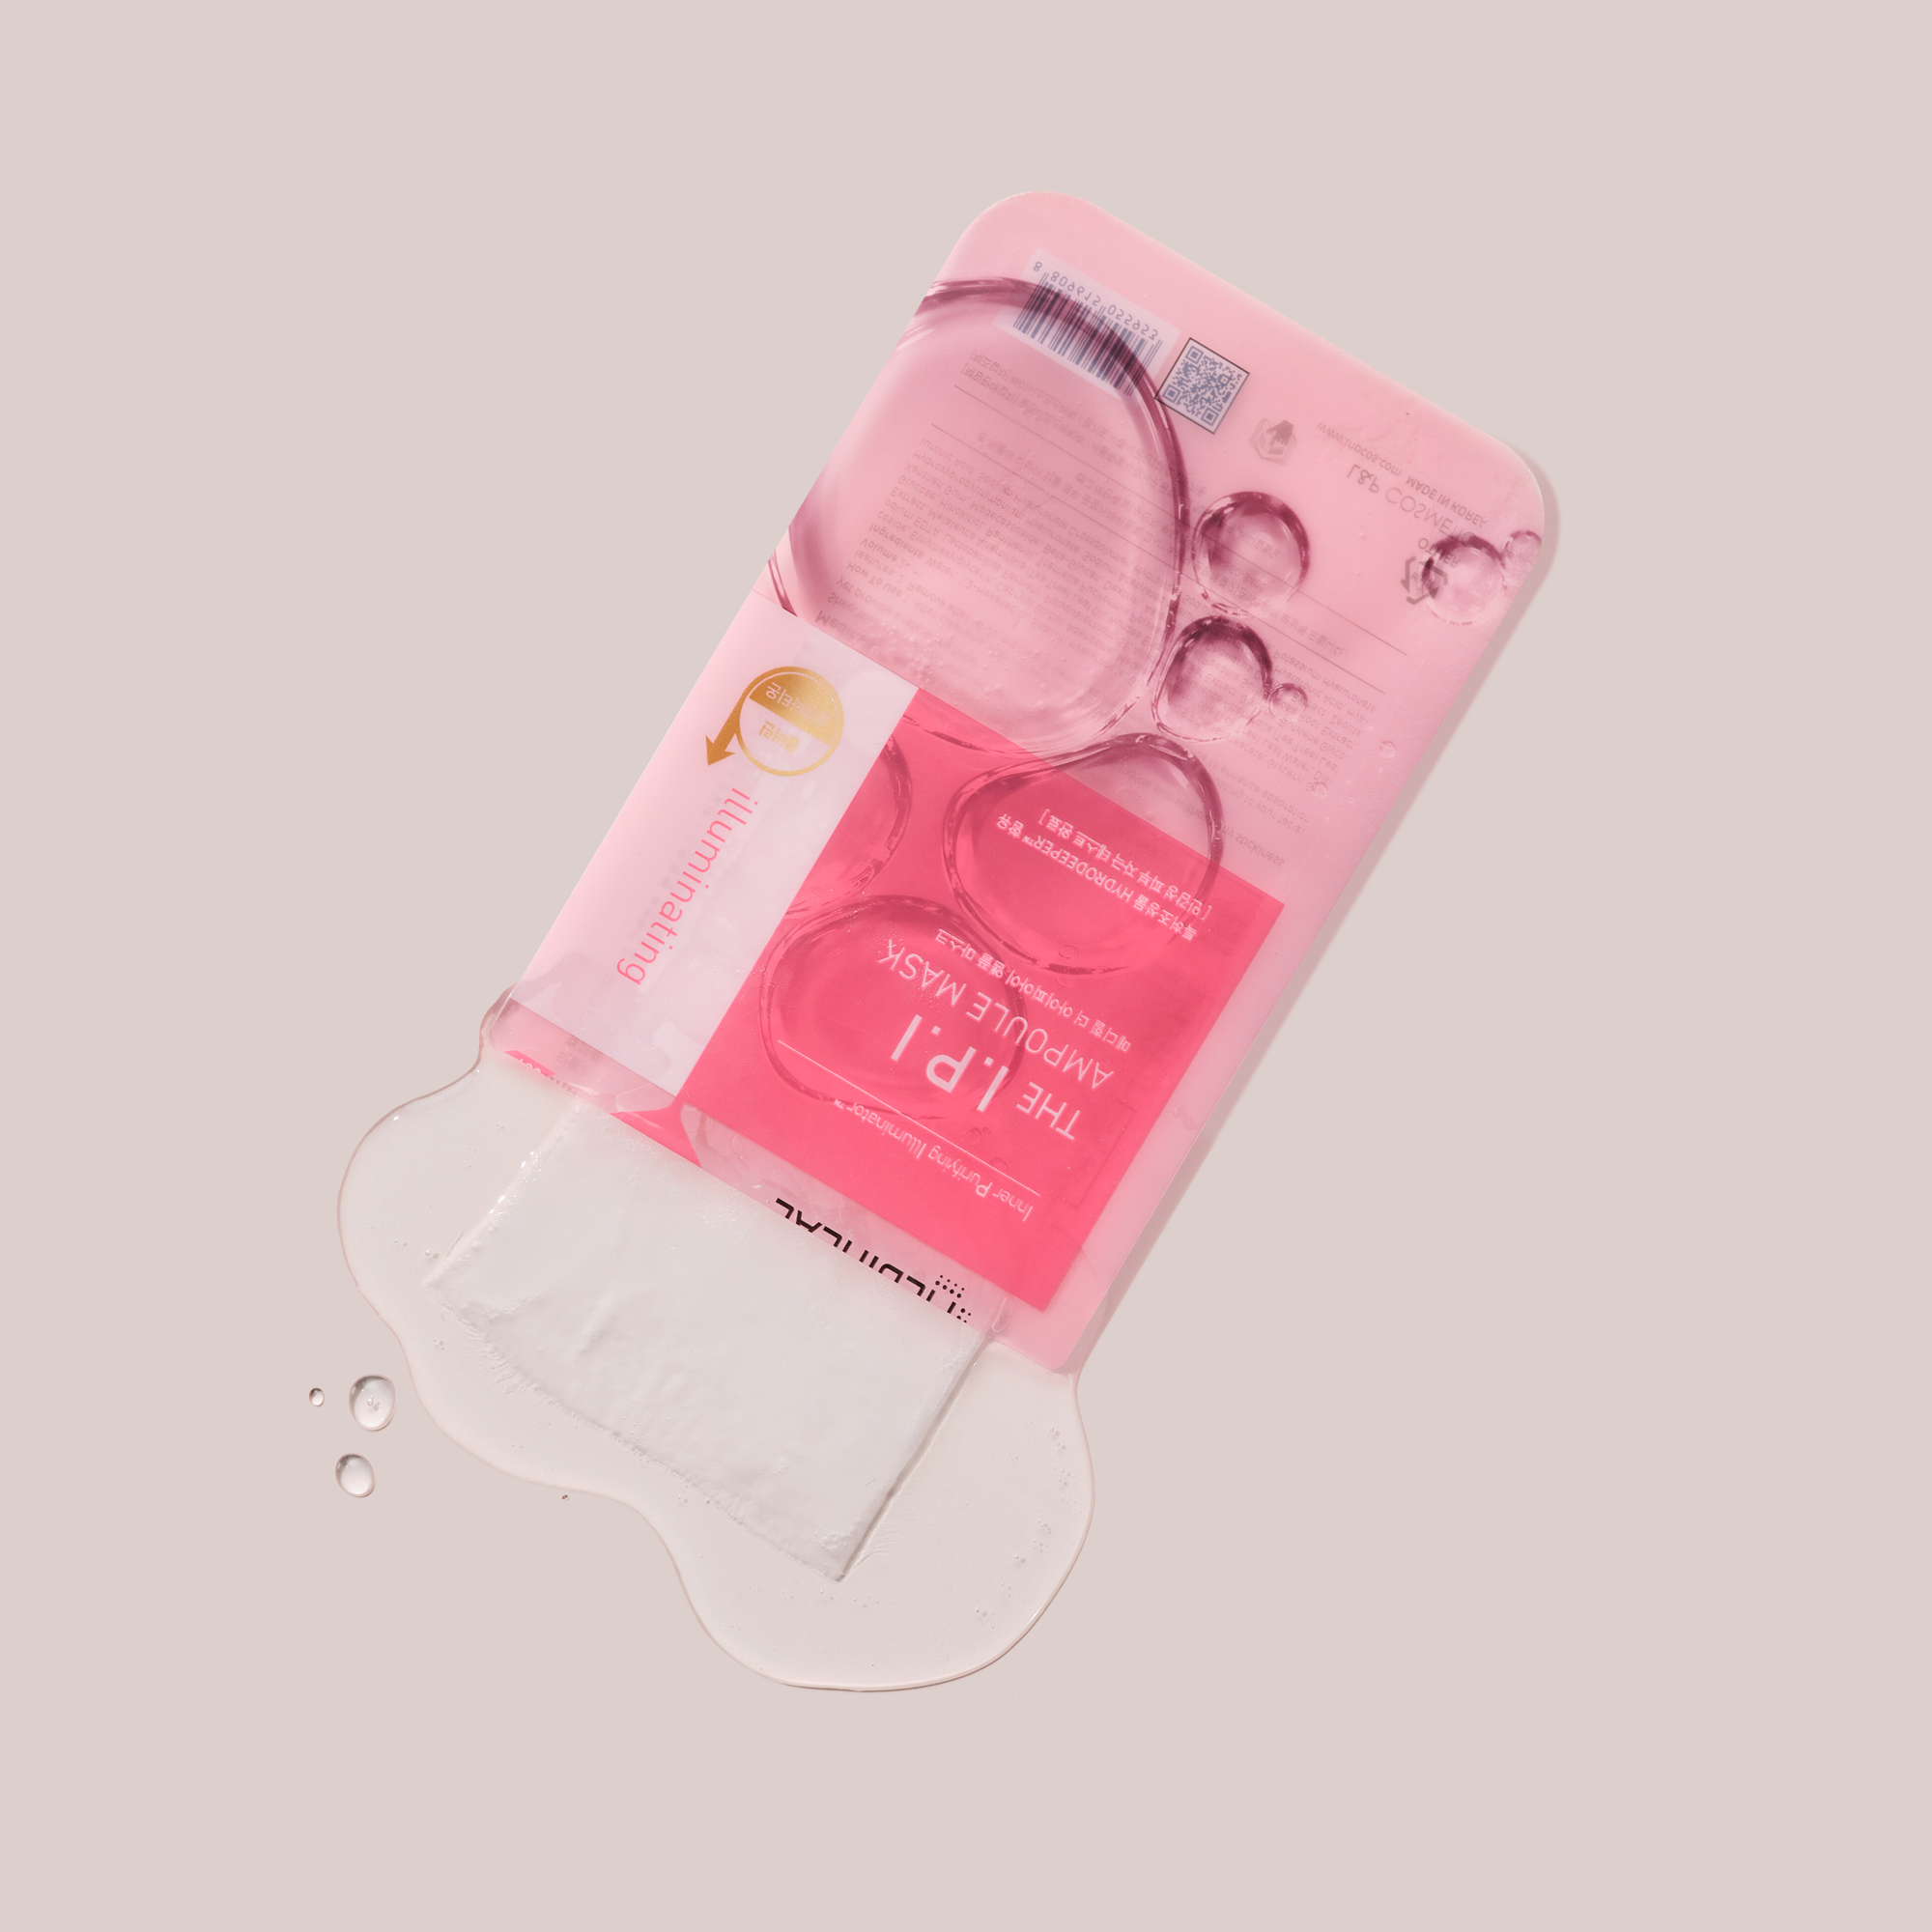 THE I.P.I Brightening Ampoule Mask - [brand_name]